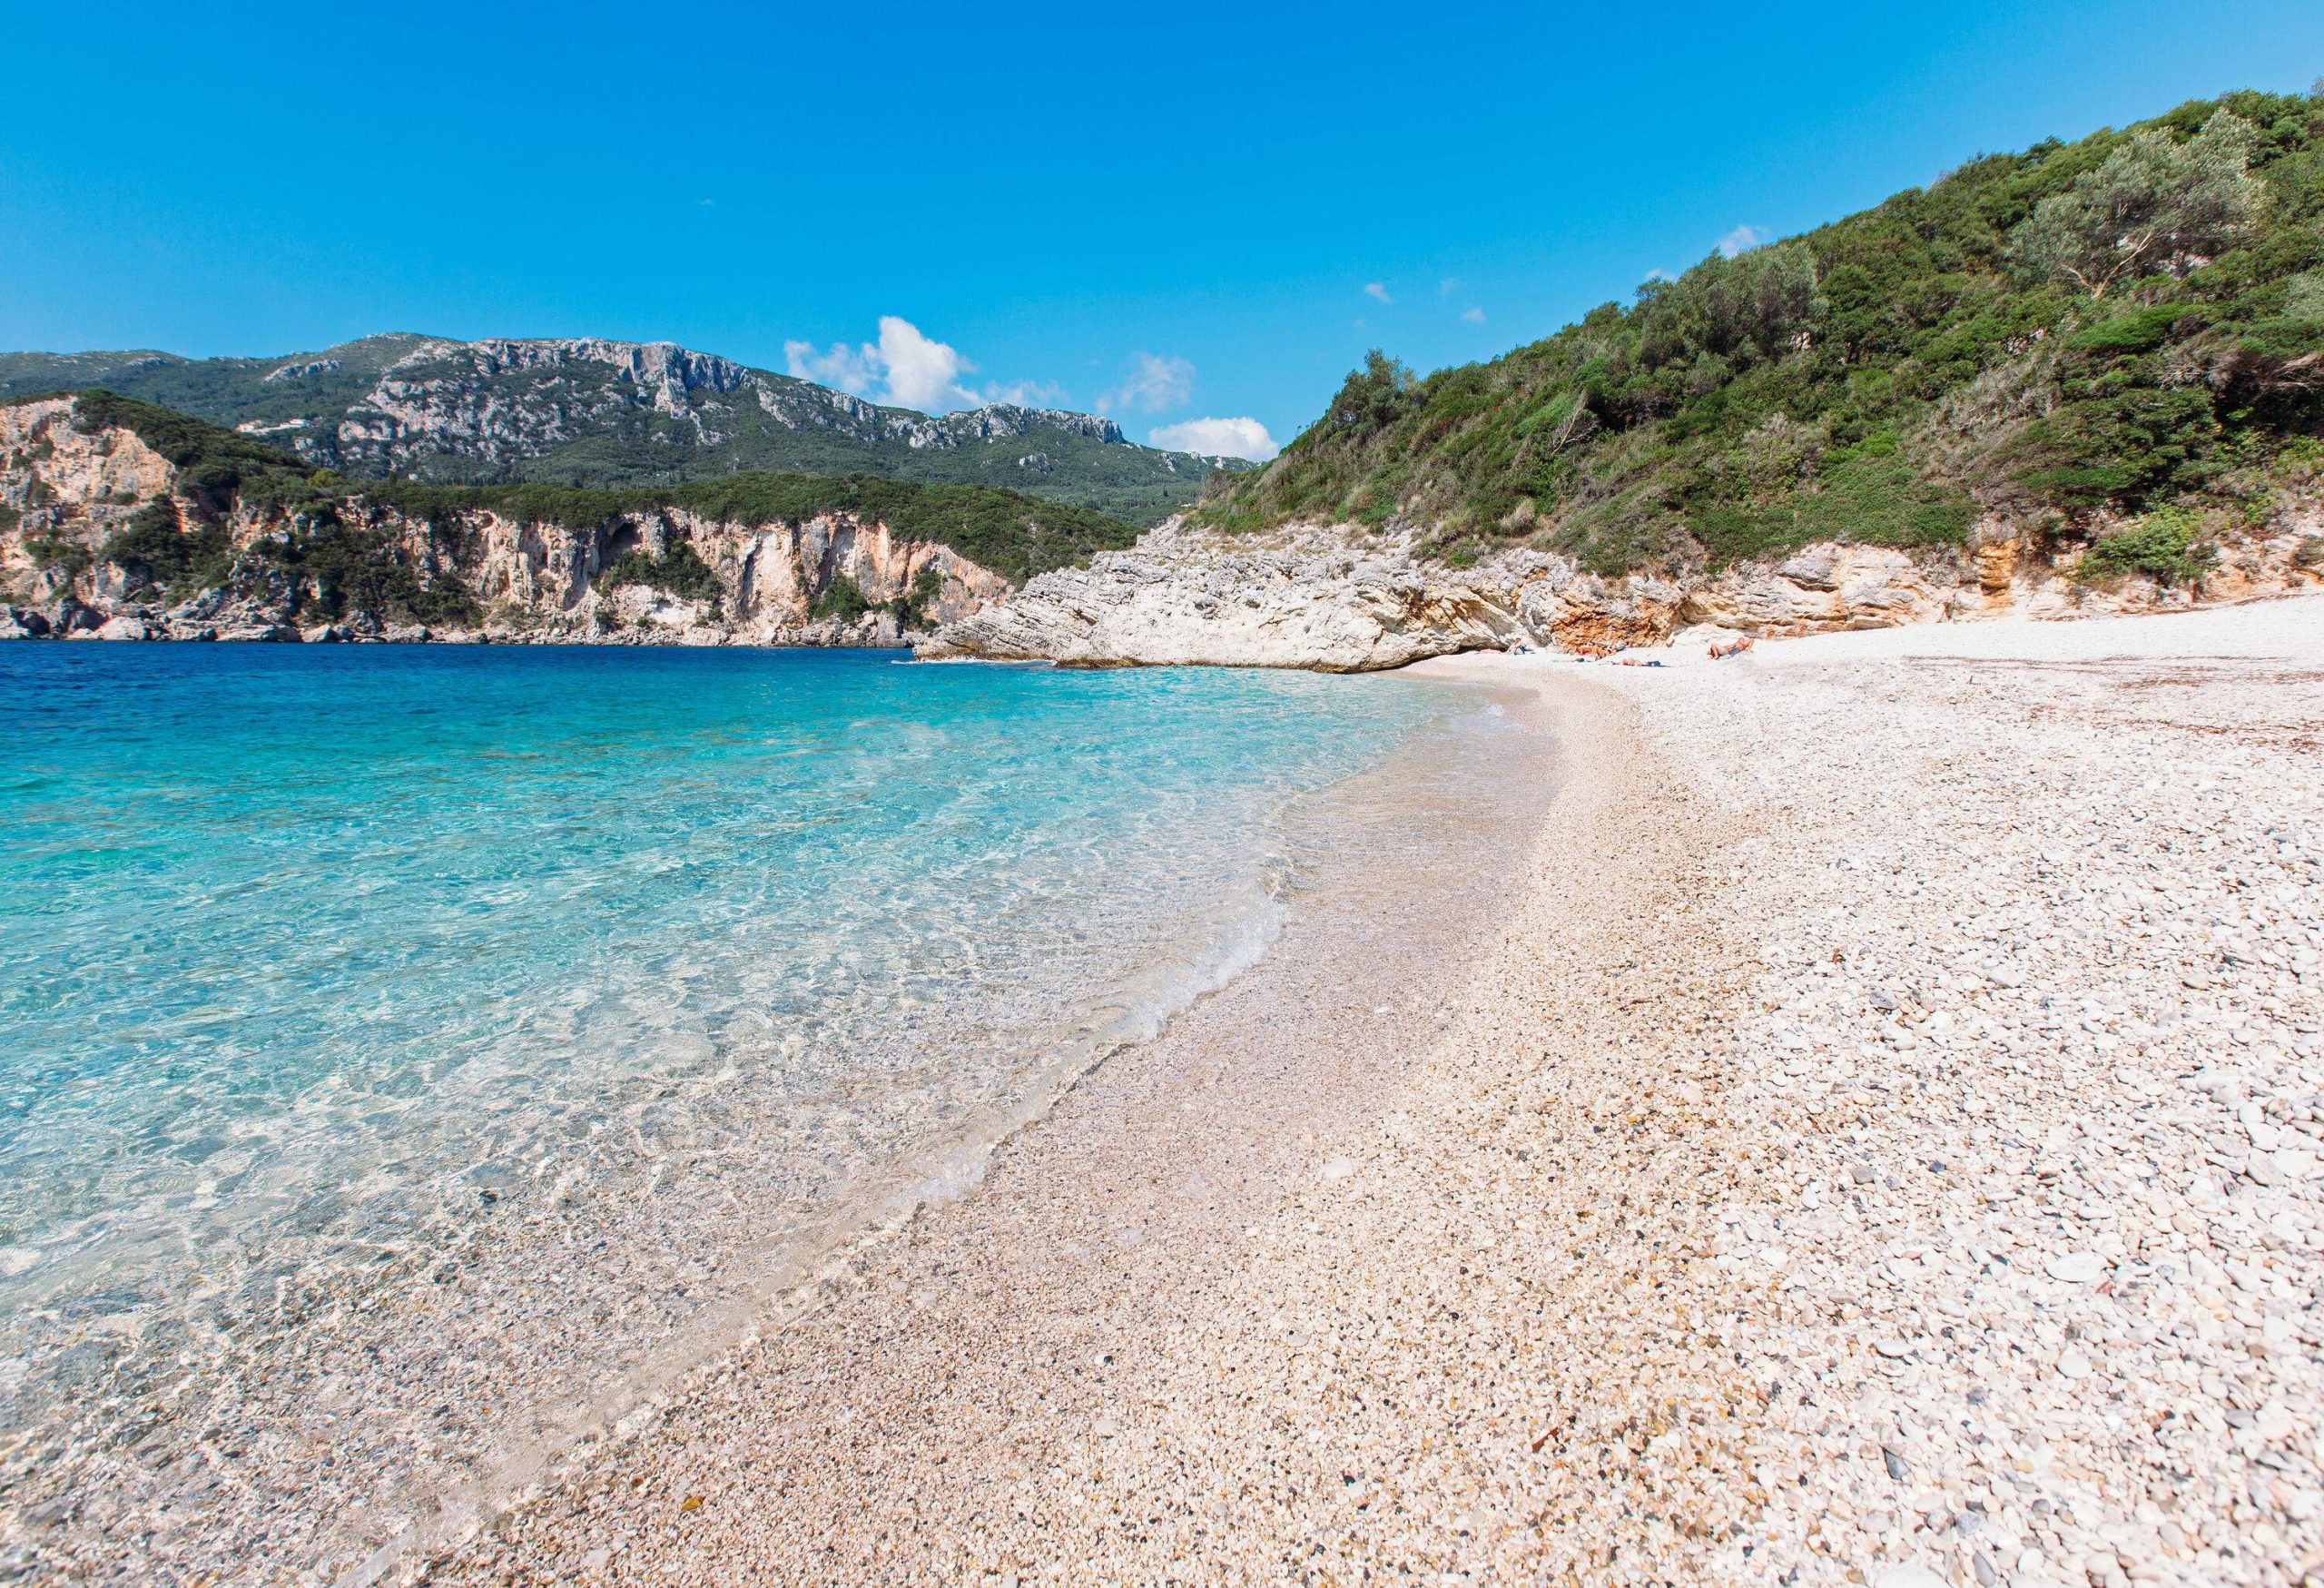 A pristine white beach with clear waters along a coast with rocky slopes.